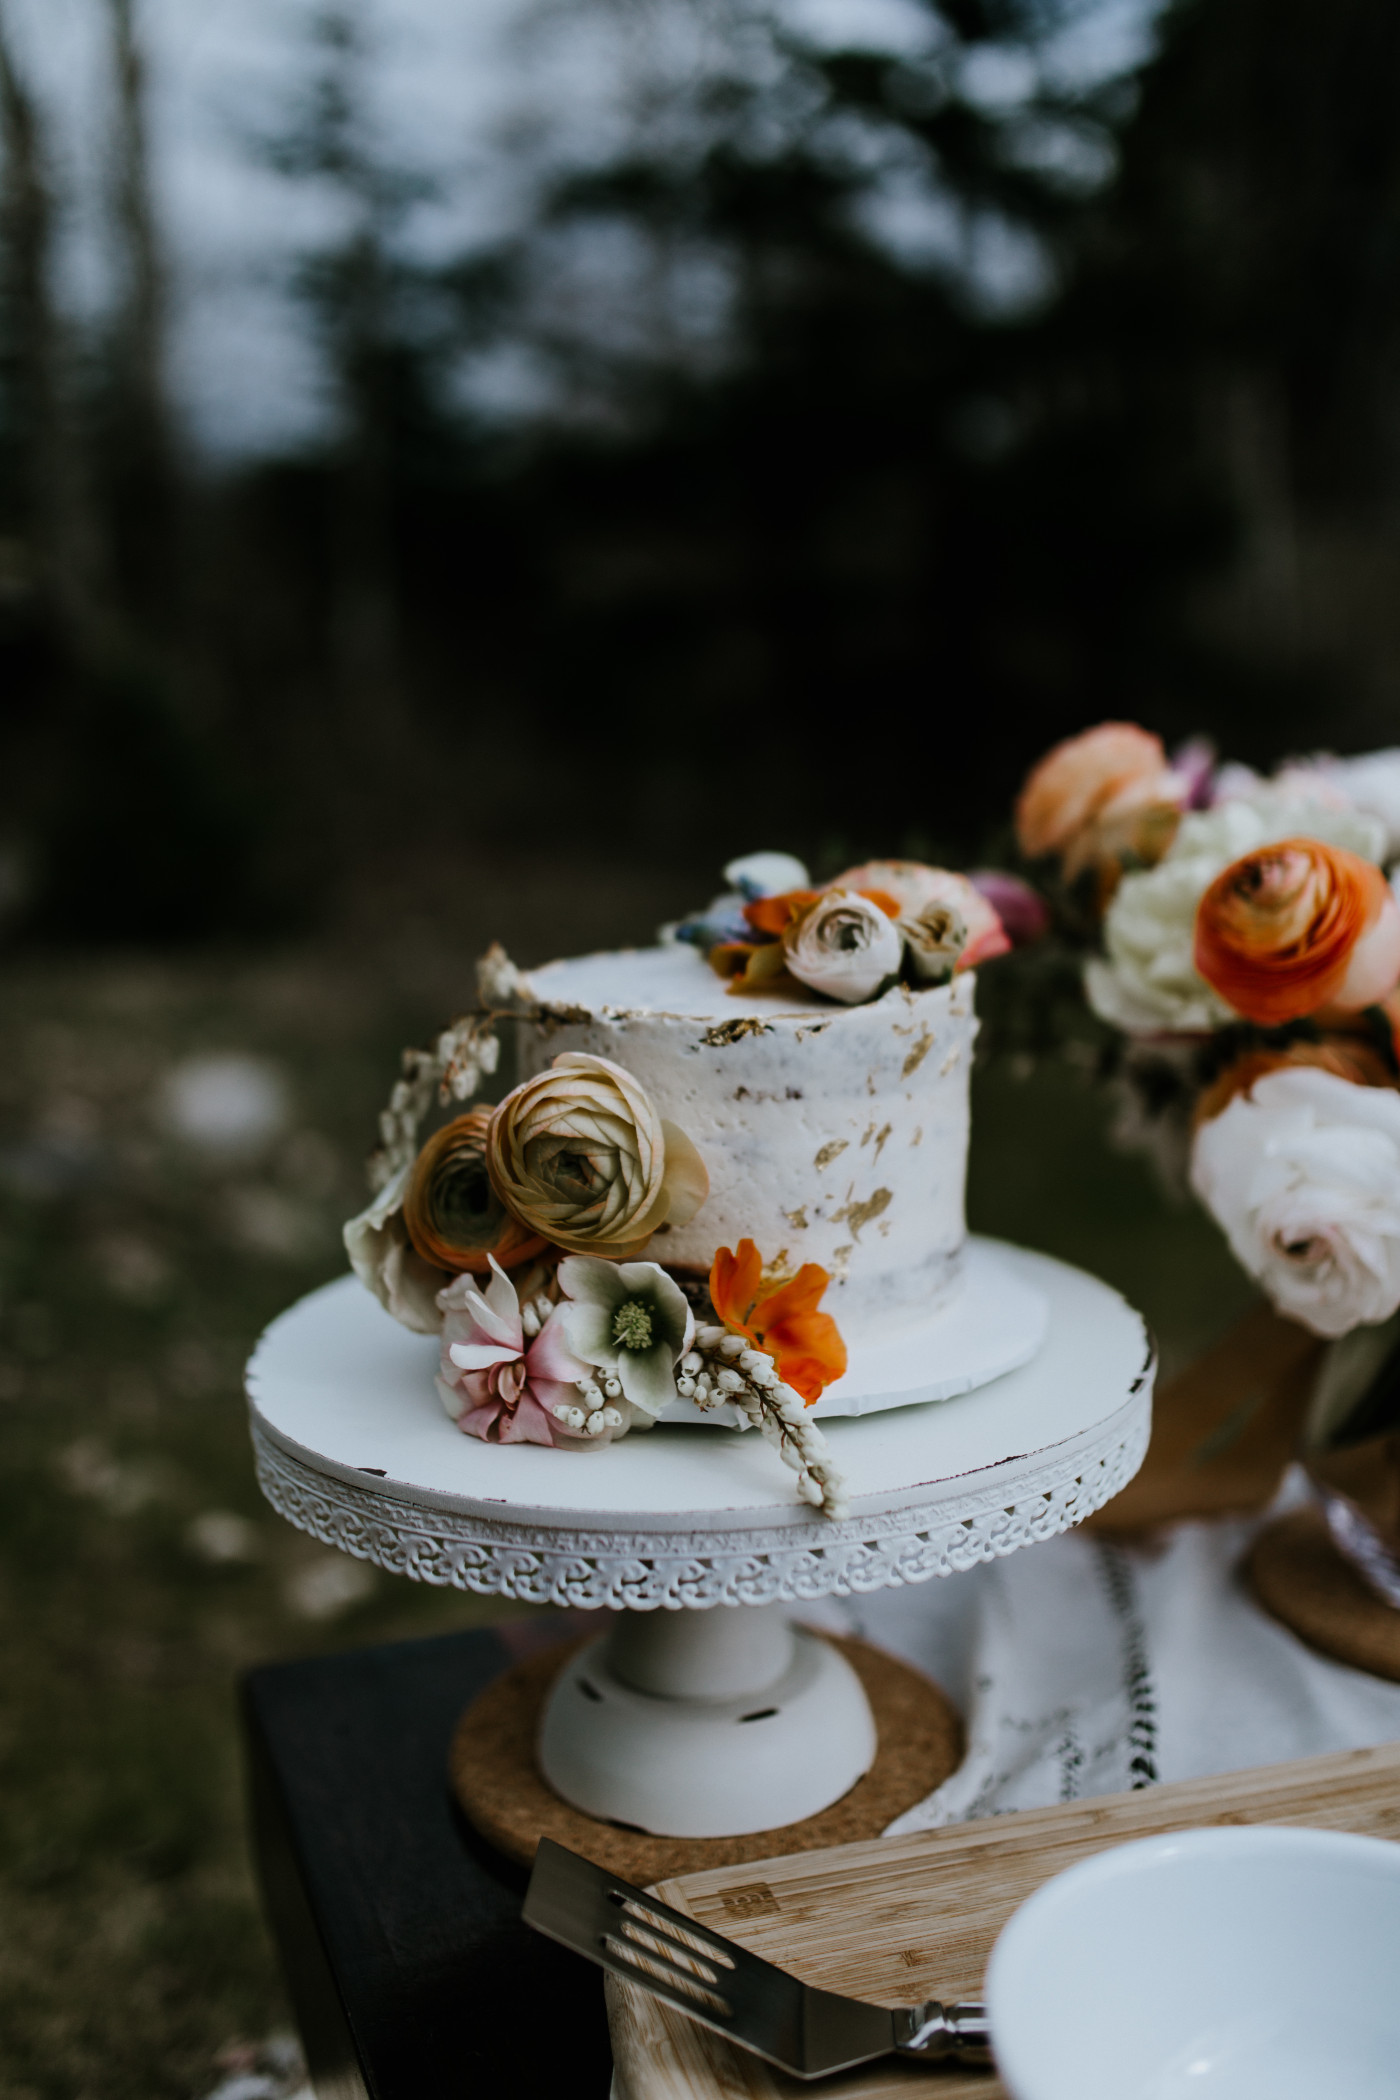 An elopement wedding cake. Elopement photography at Columbia River Gorge by Sienna Plus Josh.